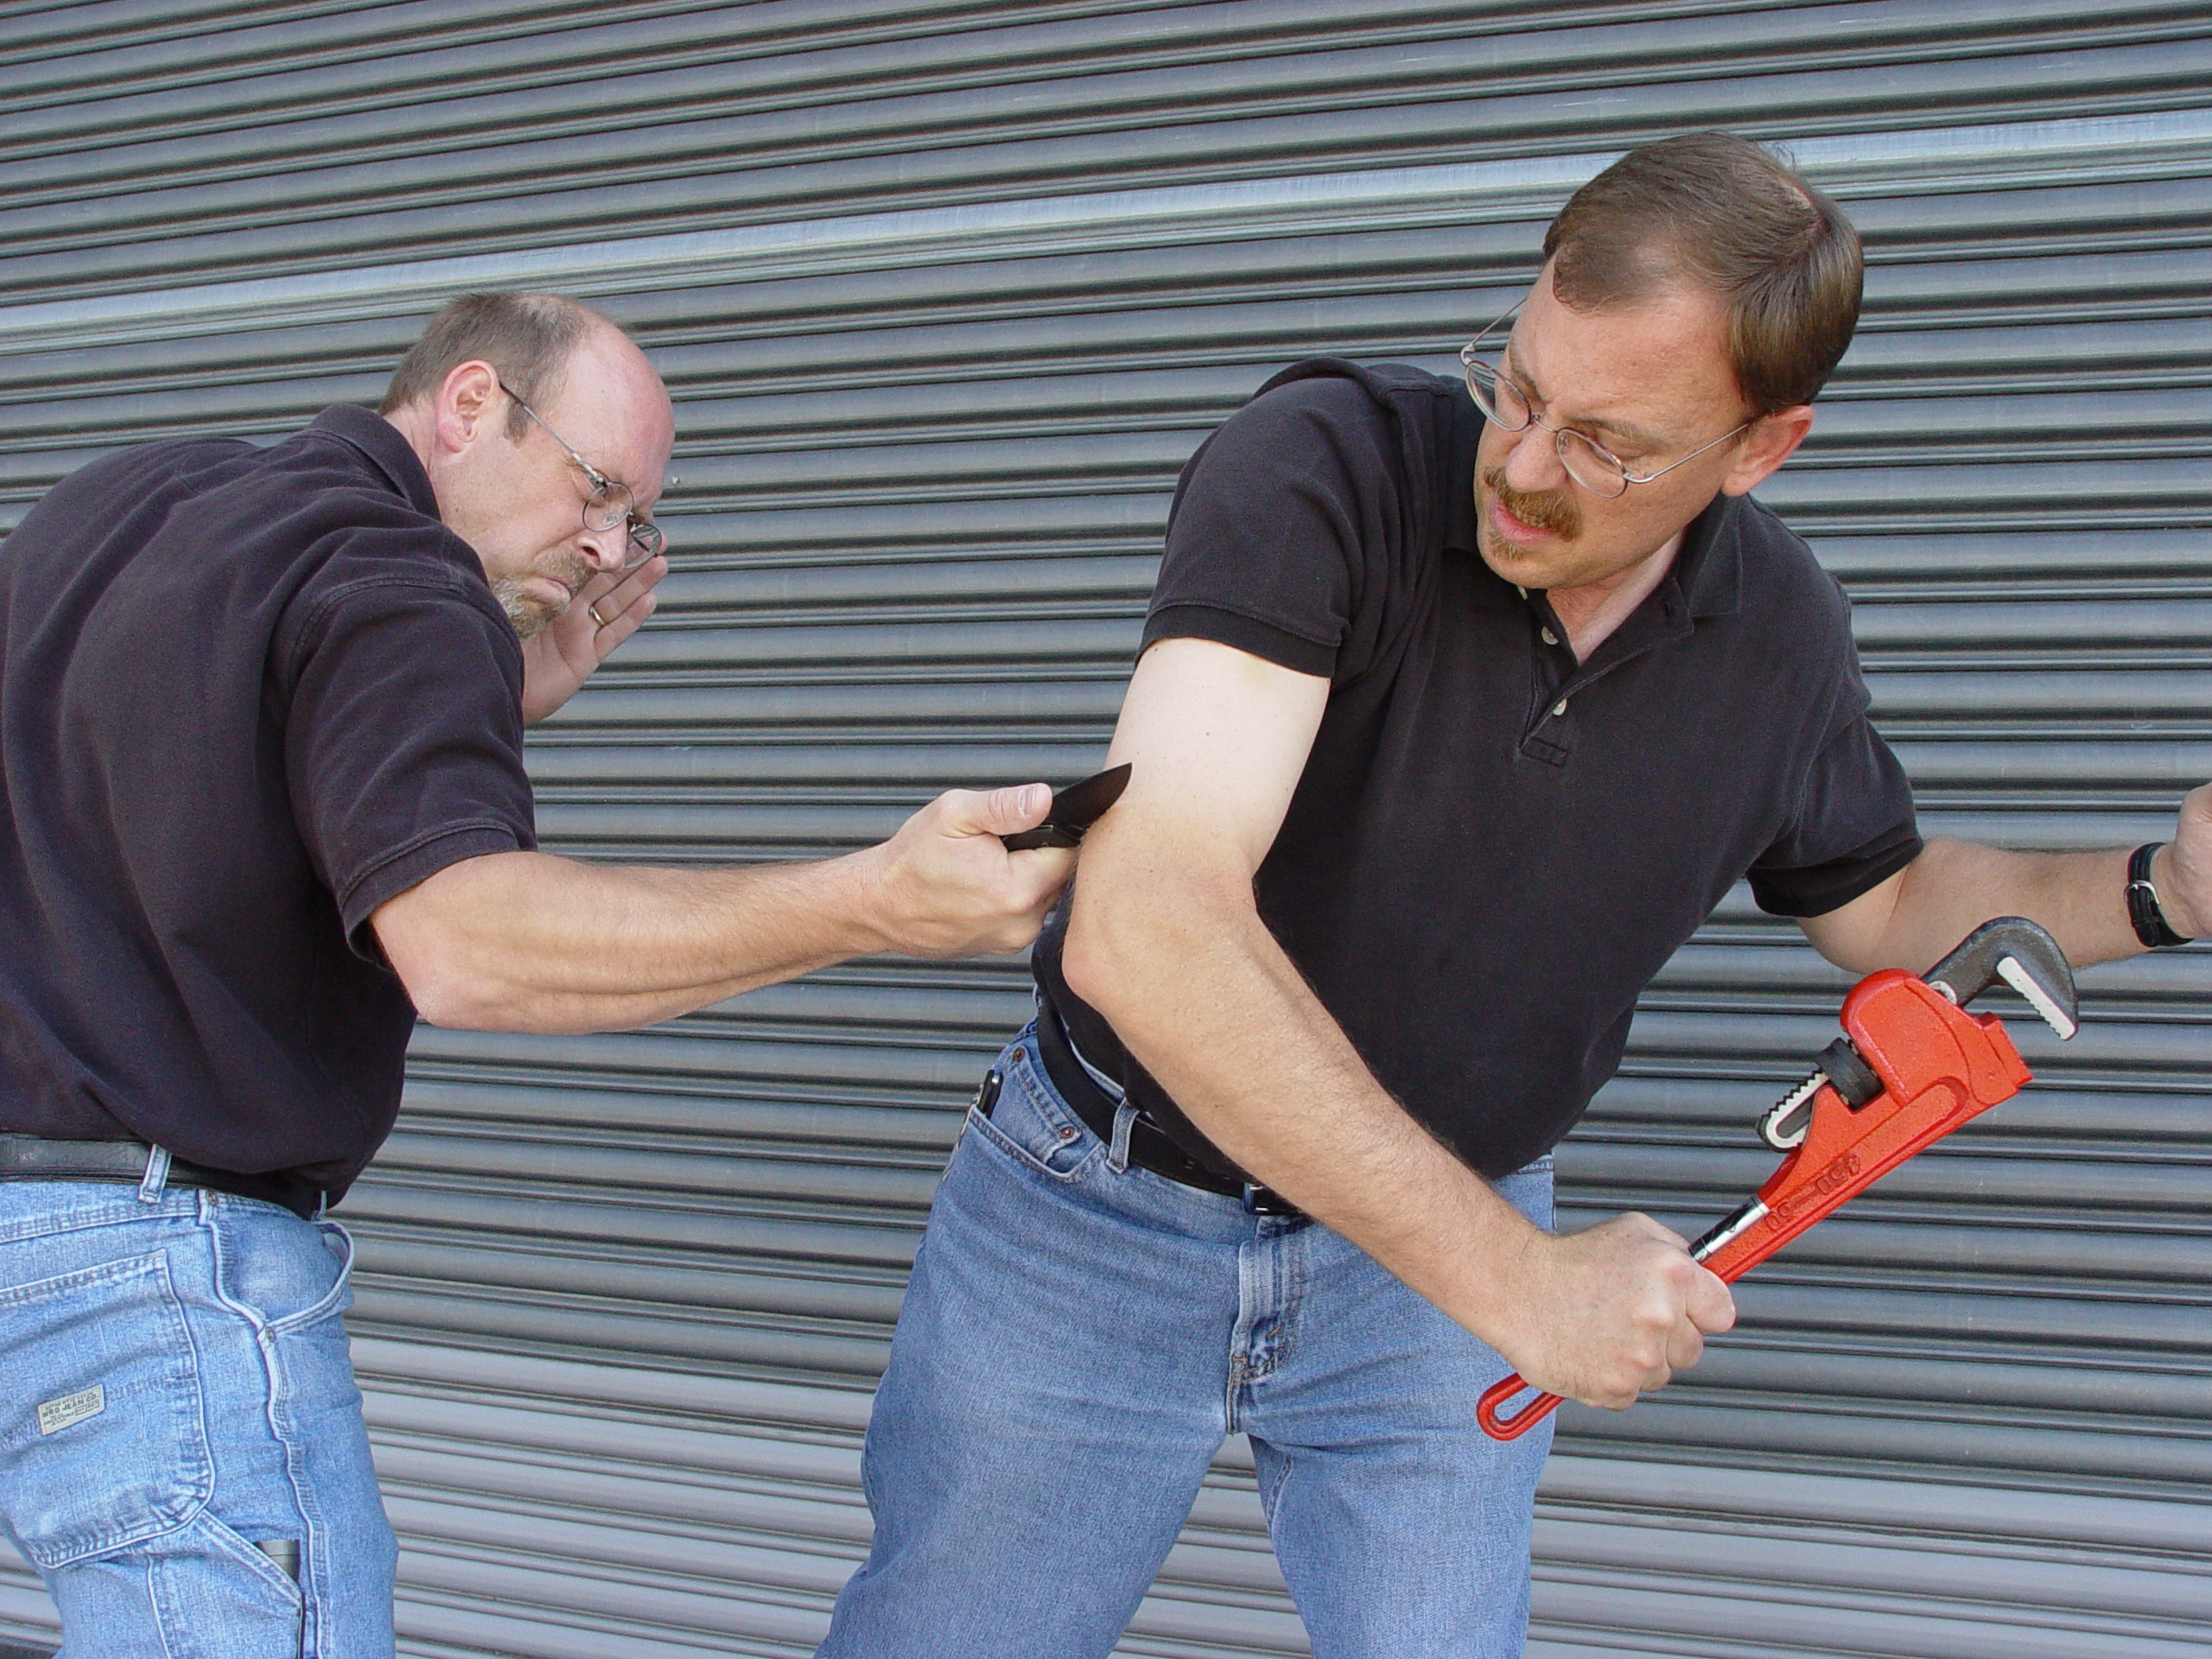 A cut to the triceps muscle or the triceps tendon just above the elbow eliminates an attacker’s ability to extend his elbow. It also targets the musculospiral nerve, which leads to the radial nerve and controls the thumb and index finger. Damaging these structures severely limits the attacker’s ability to wield a weapon.